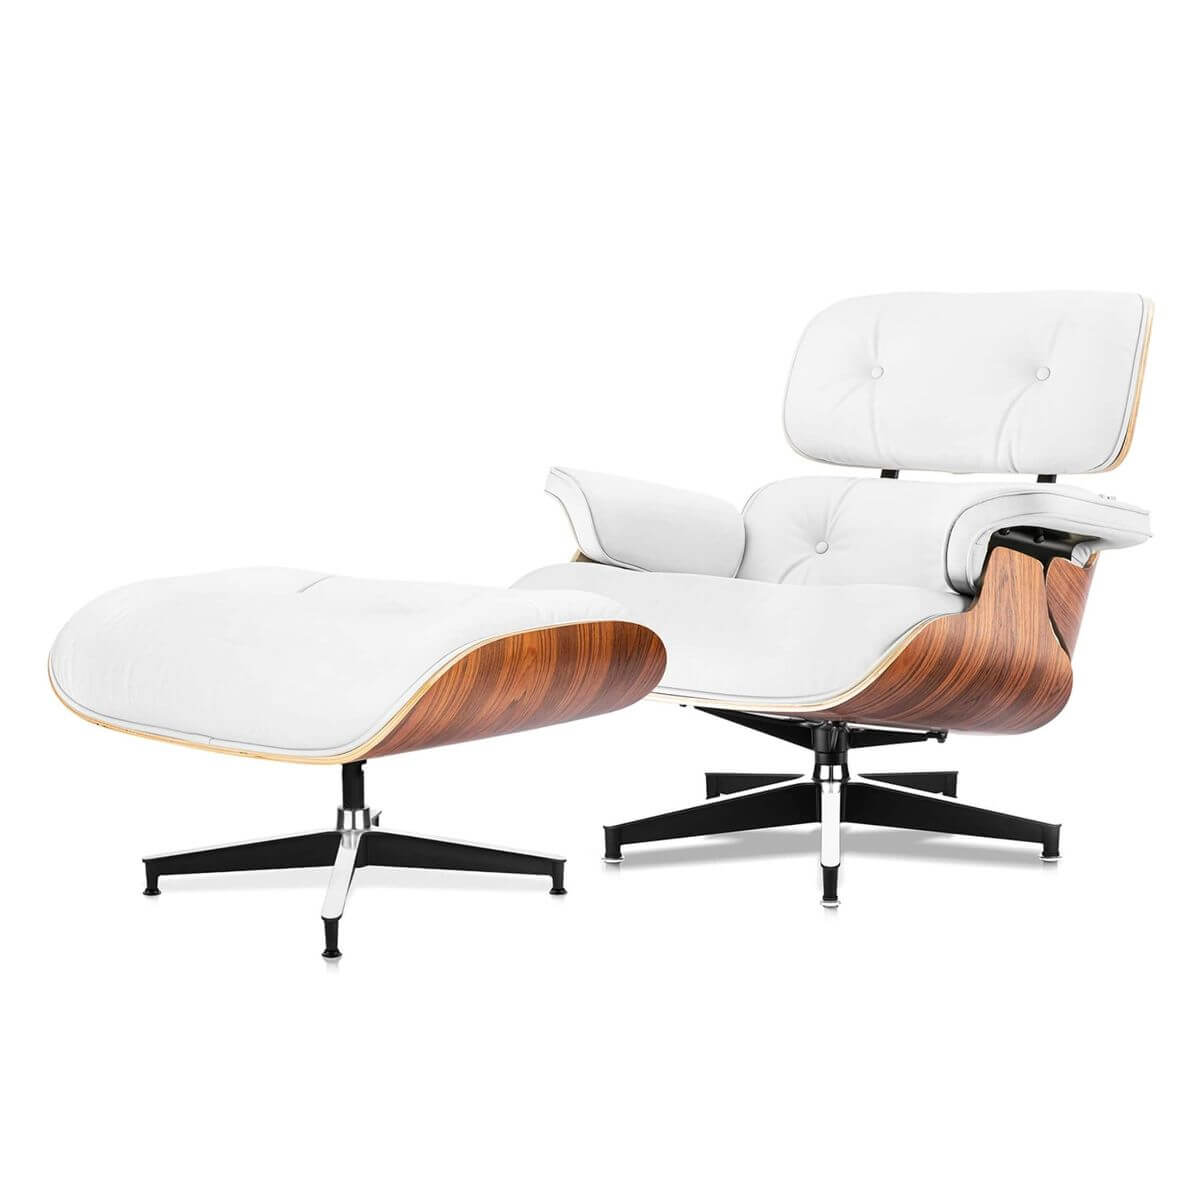 Luxuriance Designs - Eames Lounge Chair and Ottoman Replica (Premium Tall Version) - Palisander Pure White - Review